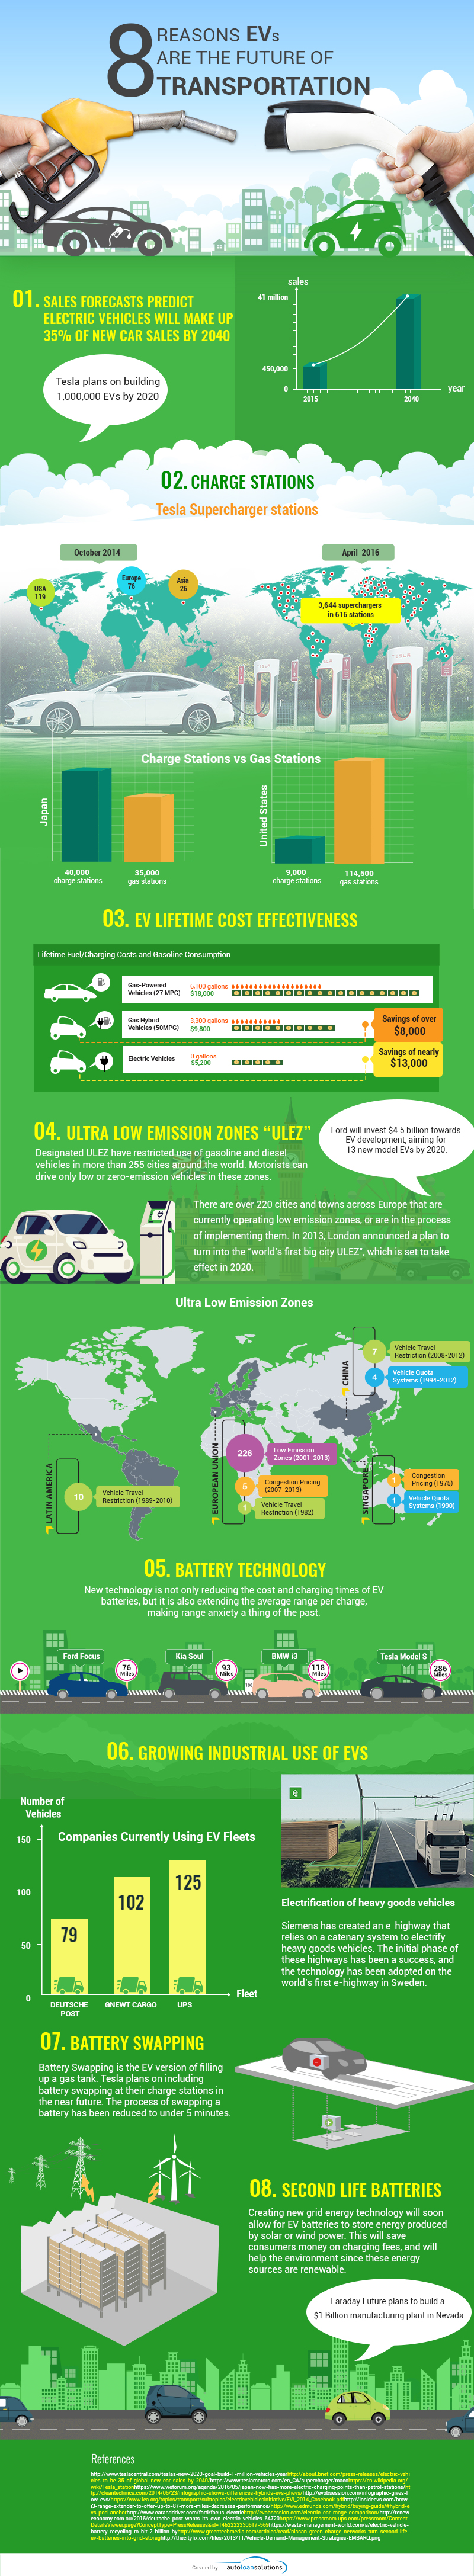 electric-vehicles-are-the-future